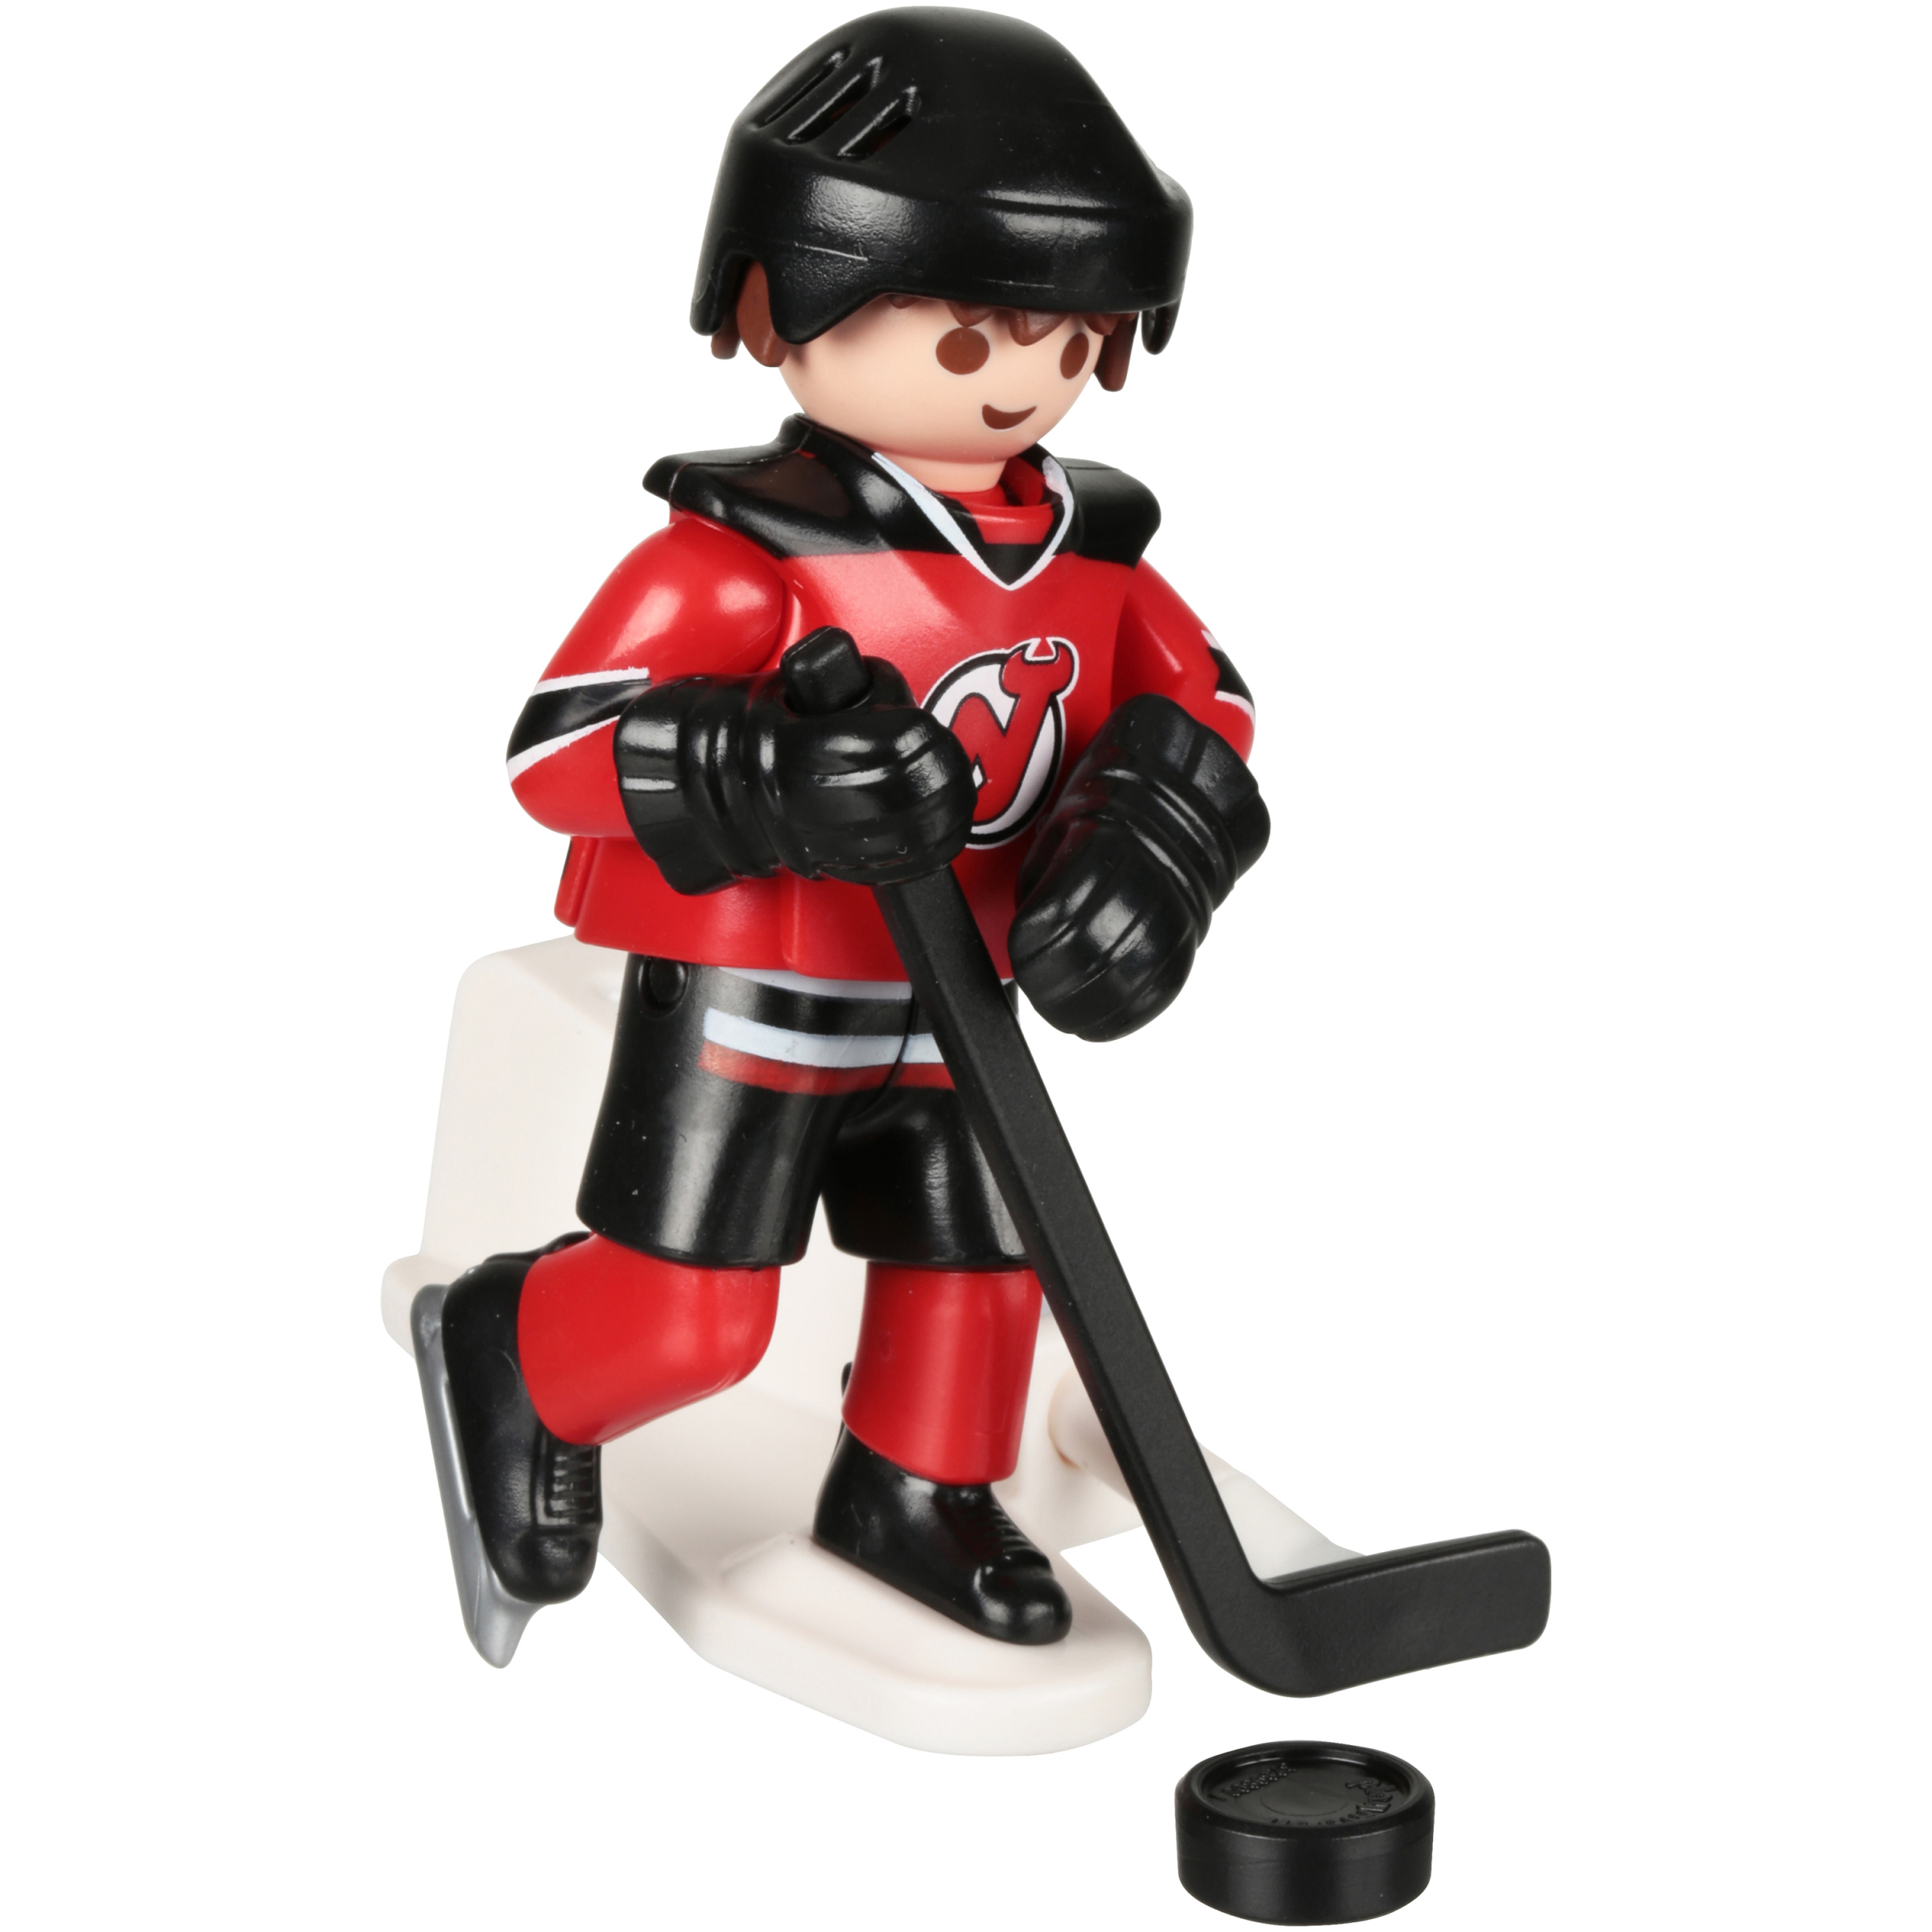 PLAYMOBIL NHL New Jersey Devils Player Figure - image 1 of 4